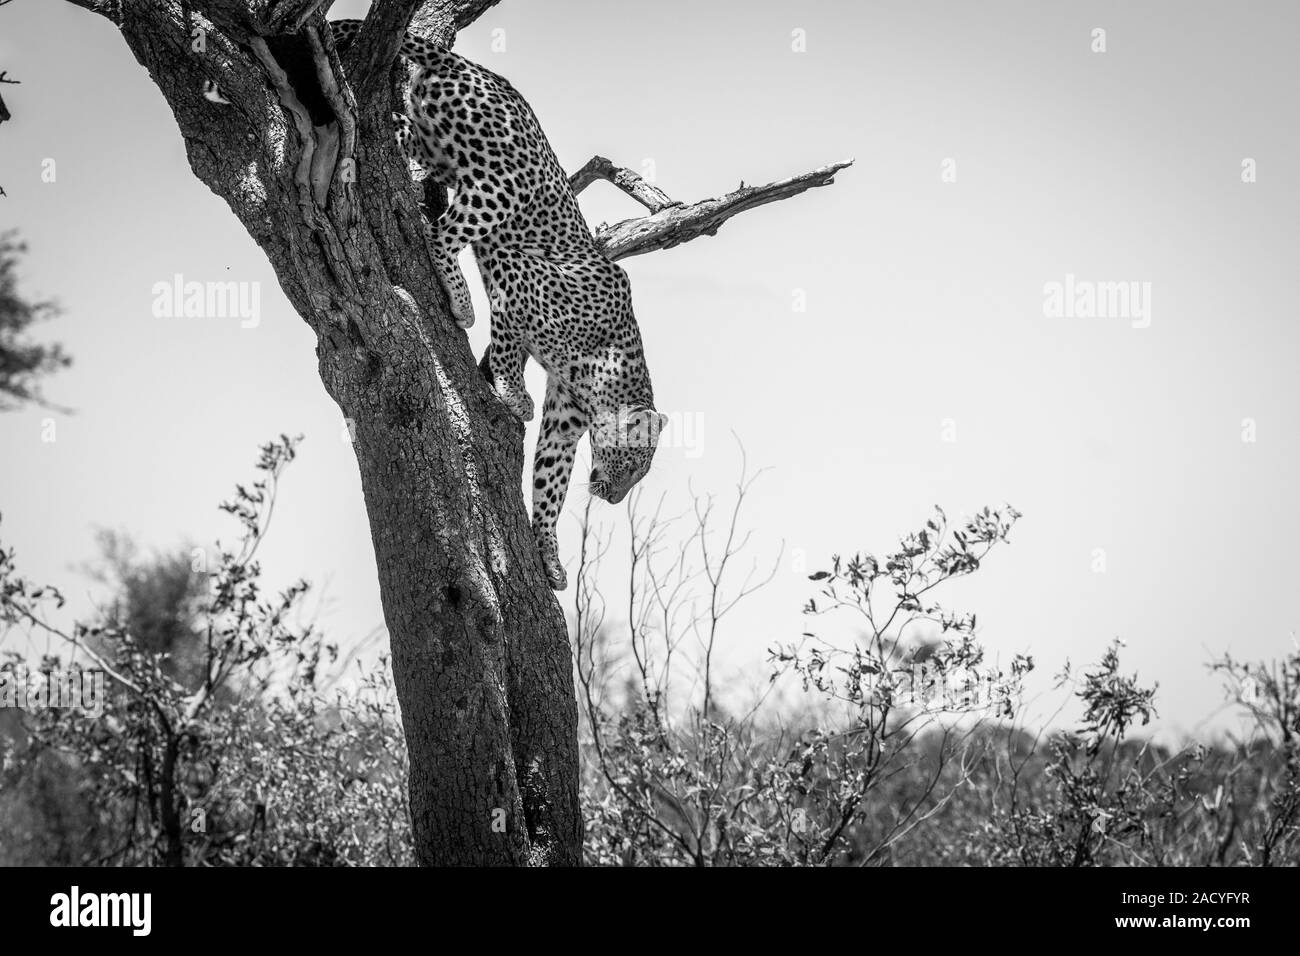 Leopard in a tree in black and white in the Kruger National Park, South Africa. Stock Photo